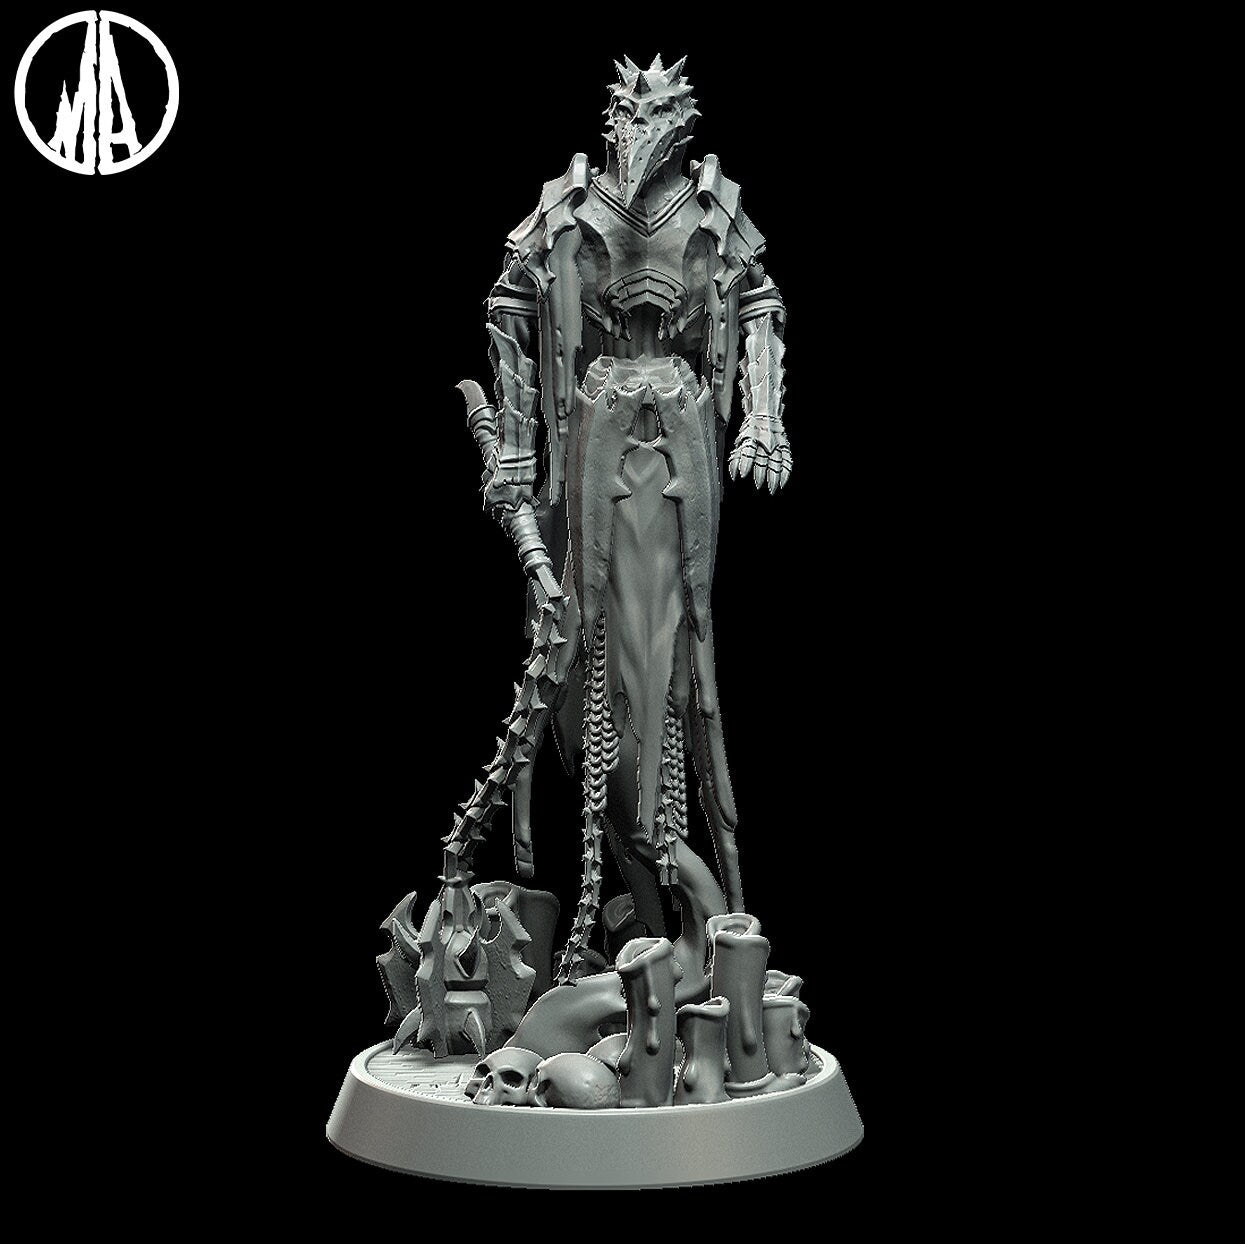 Plagued Wraith | Monolith Arts | 3D Printed Resin Model | Ideal for - RPG, DnD, Table top gaming, Fantasy